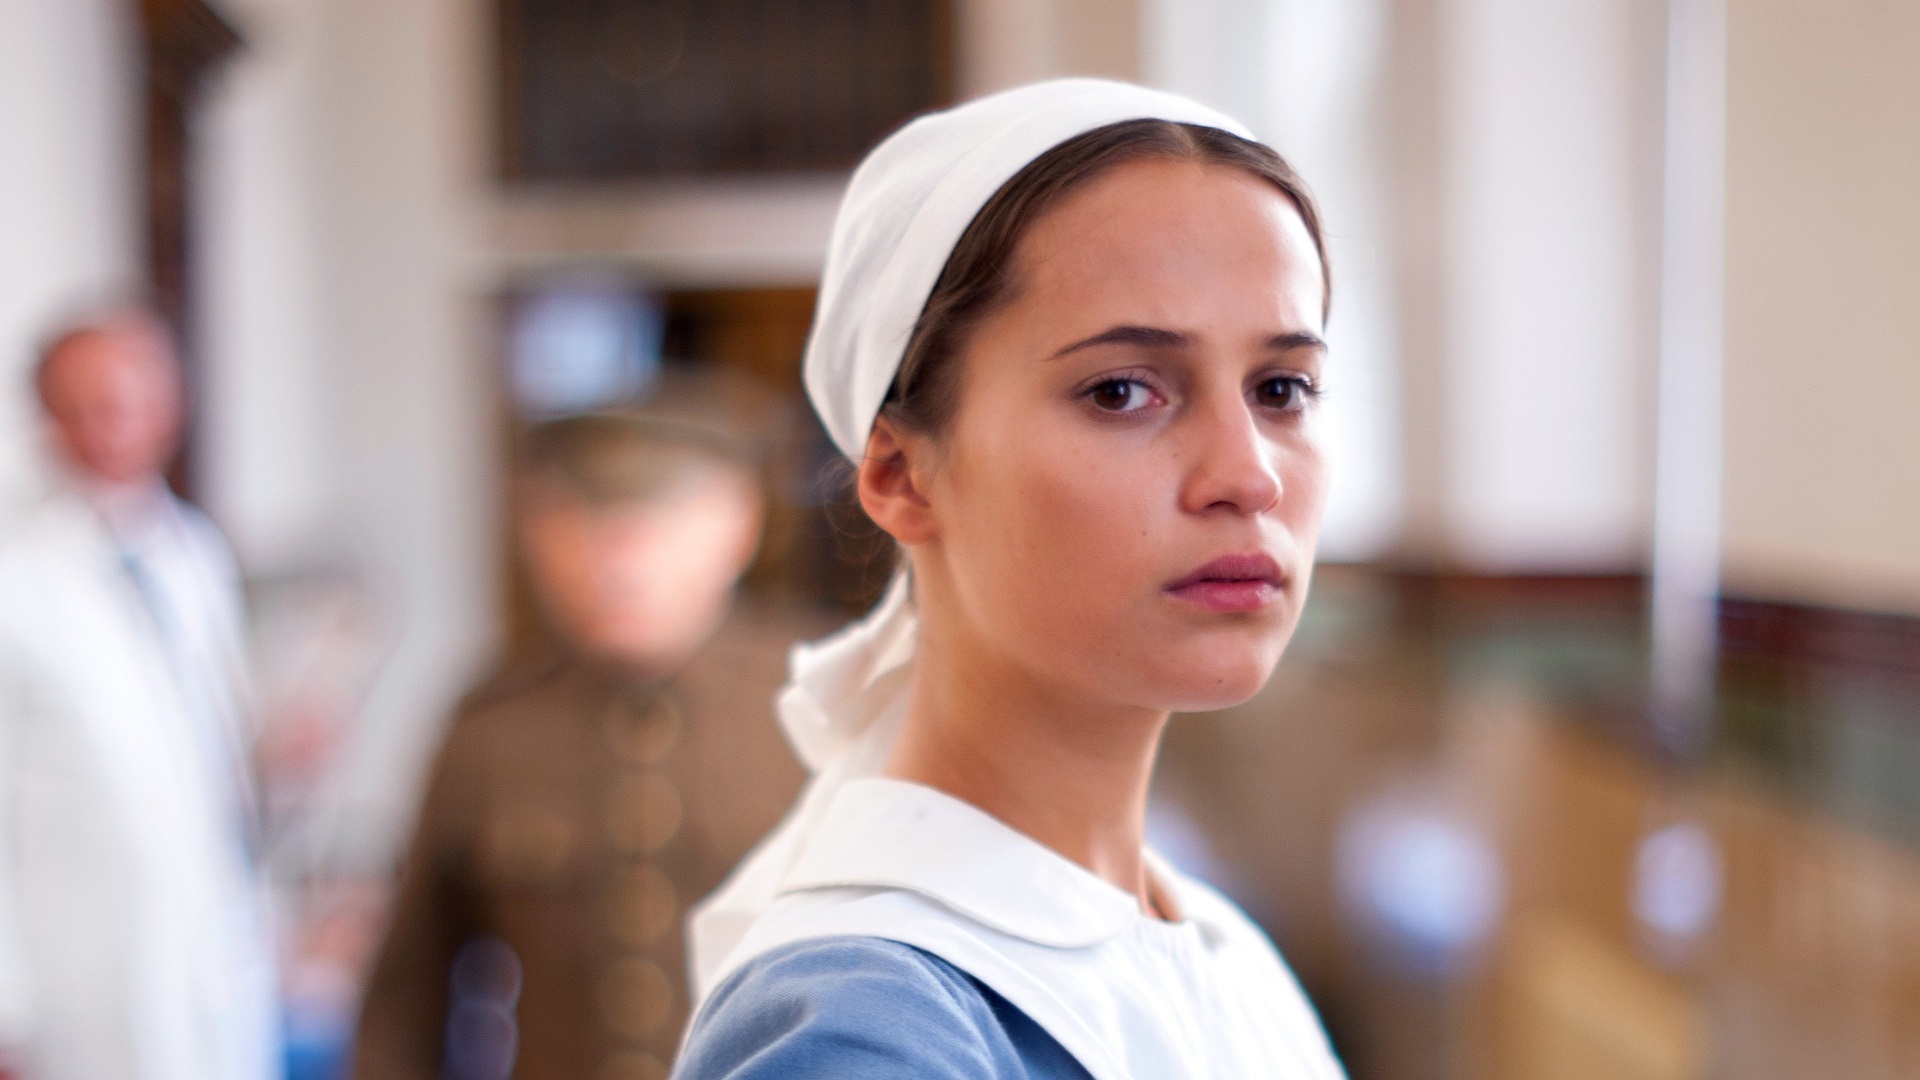 Movie Testament of Youth HD Wallpaper | Background Image